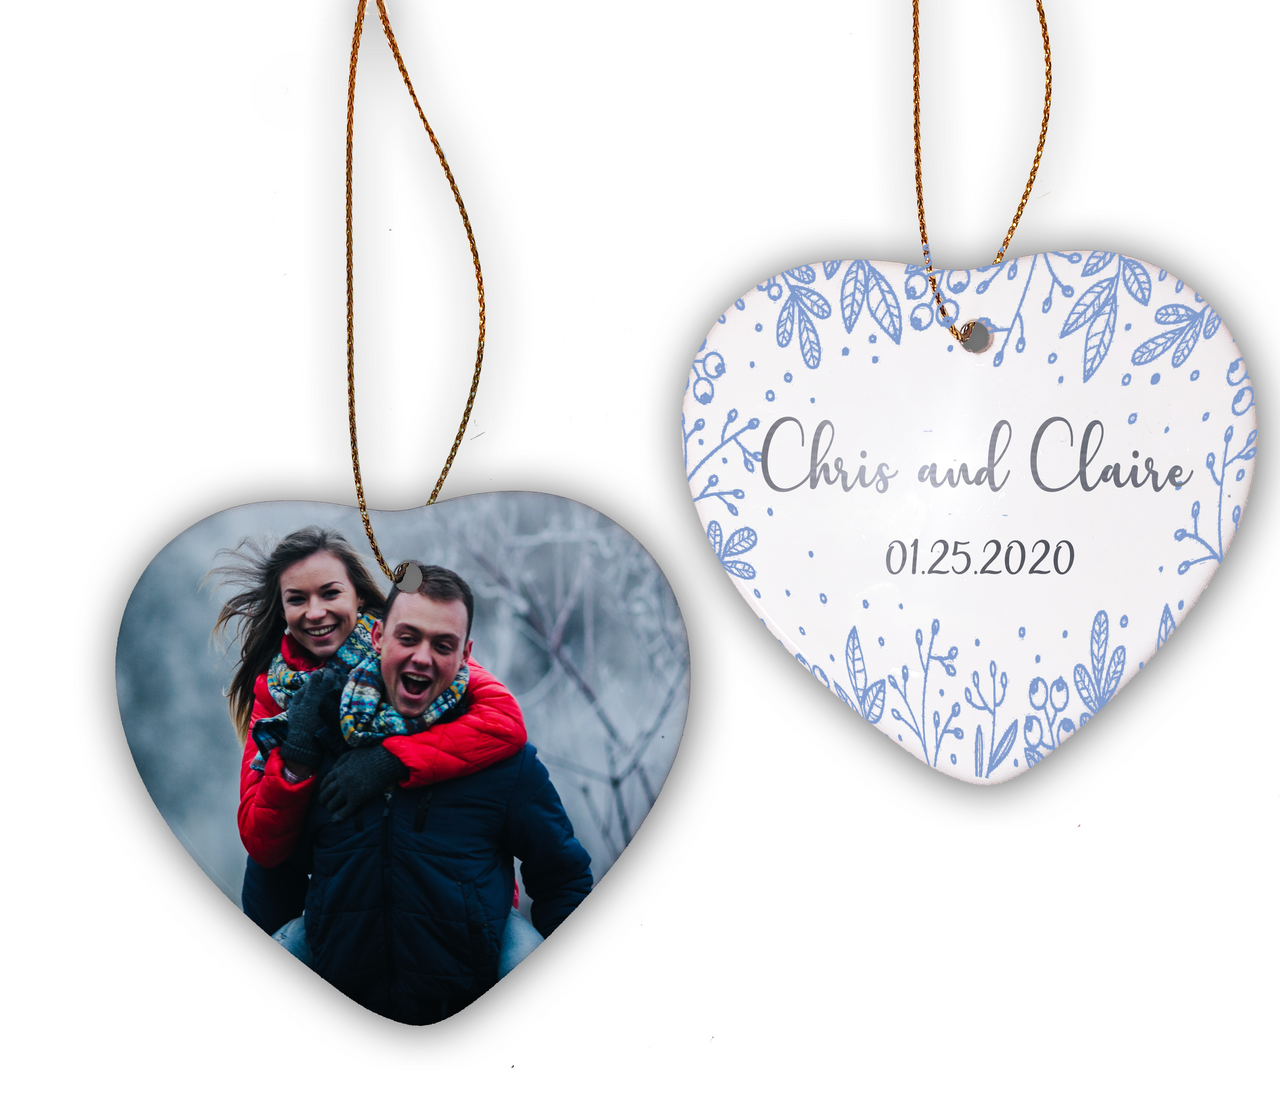 Two-Sided Heart Shaped Wedding Date Porcelain Ornament